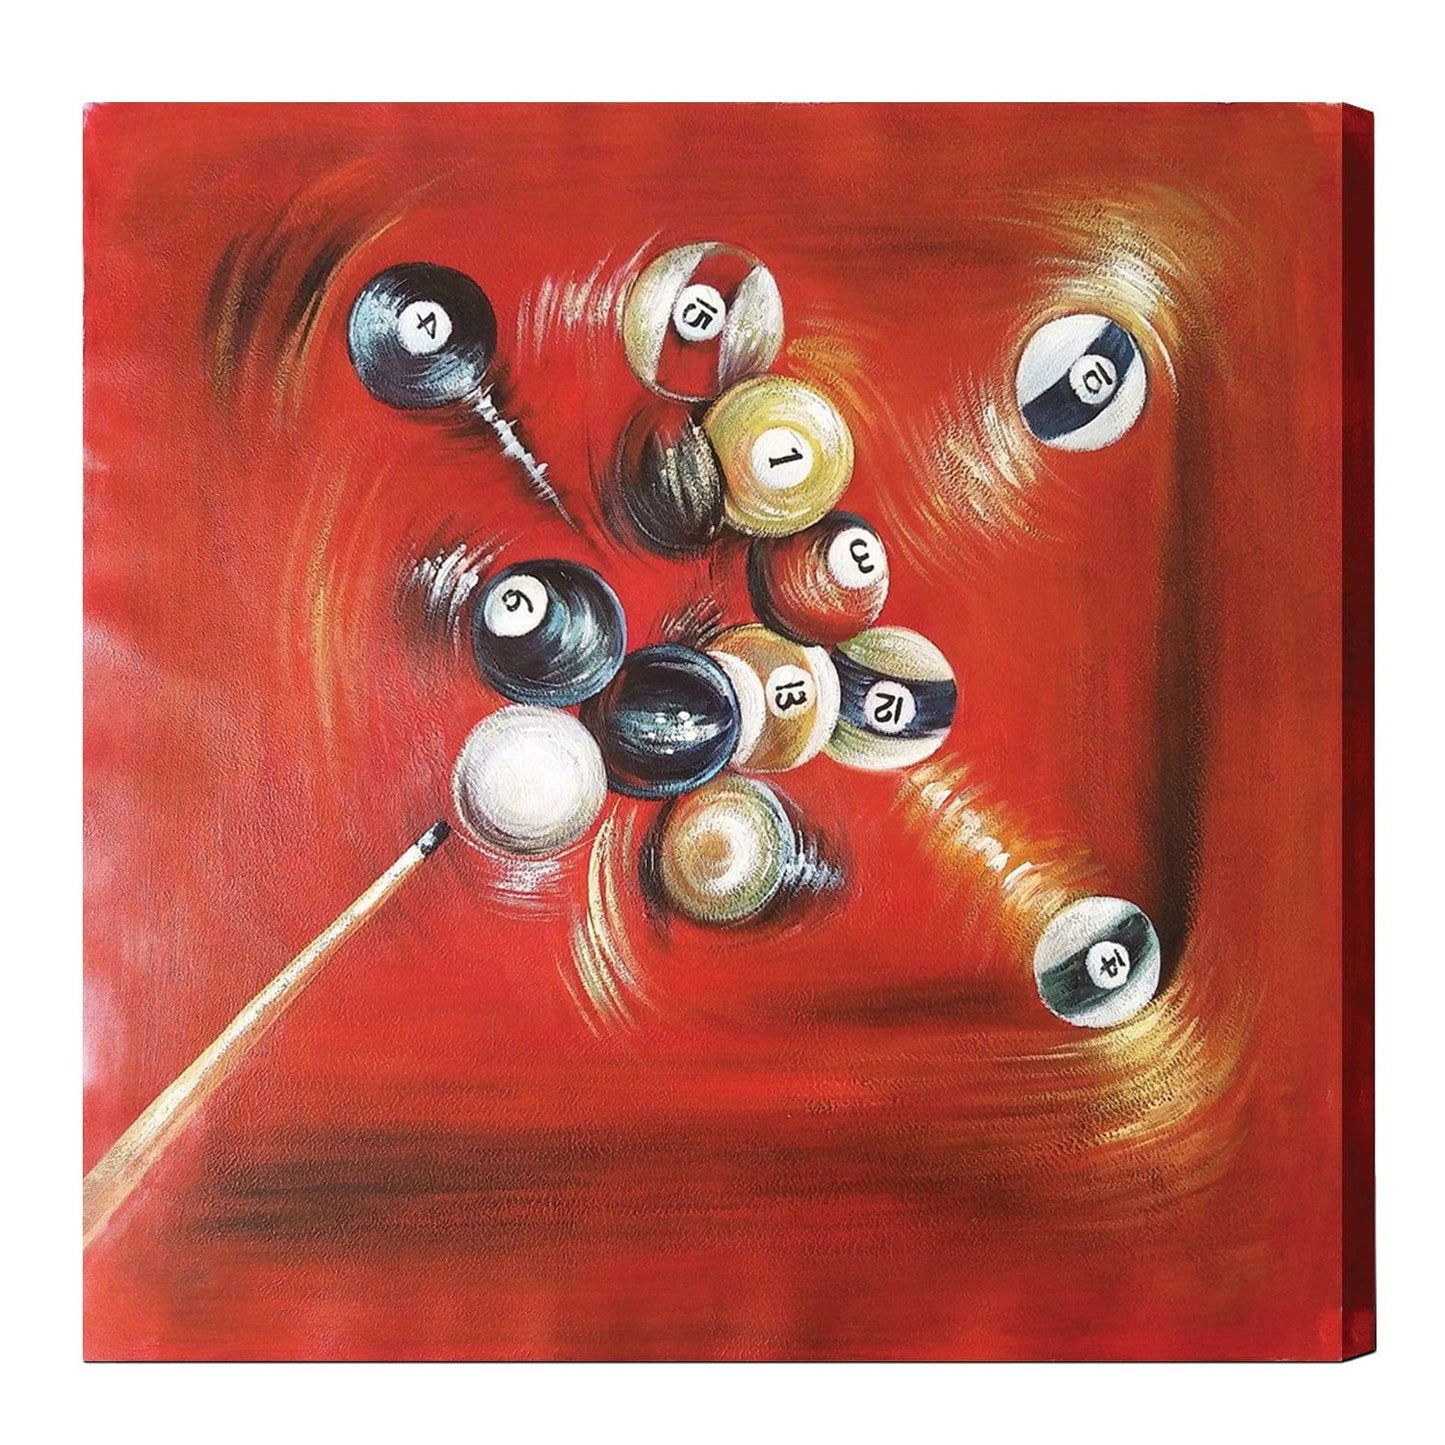 RAM Game Room Ram Game Room Oil Painting On Canvas - Balls In Motion With Cue